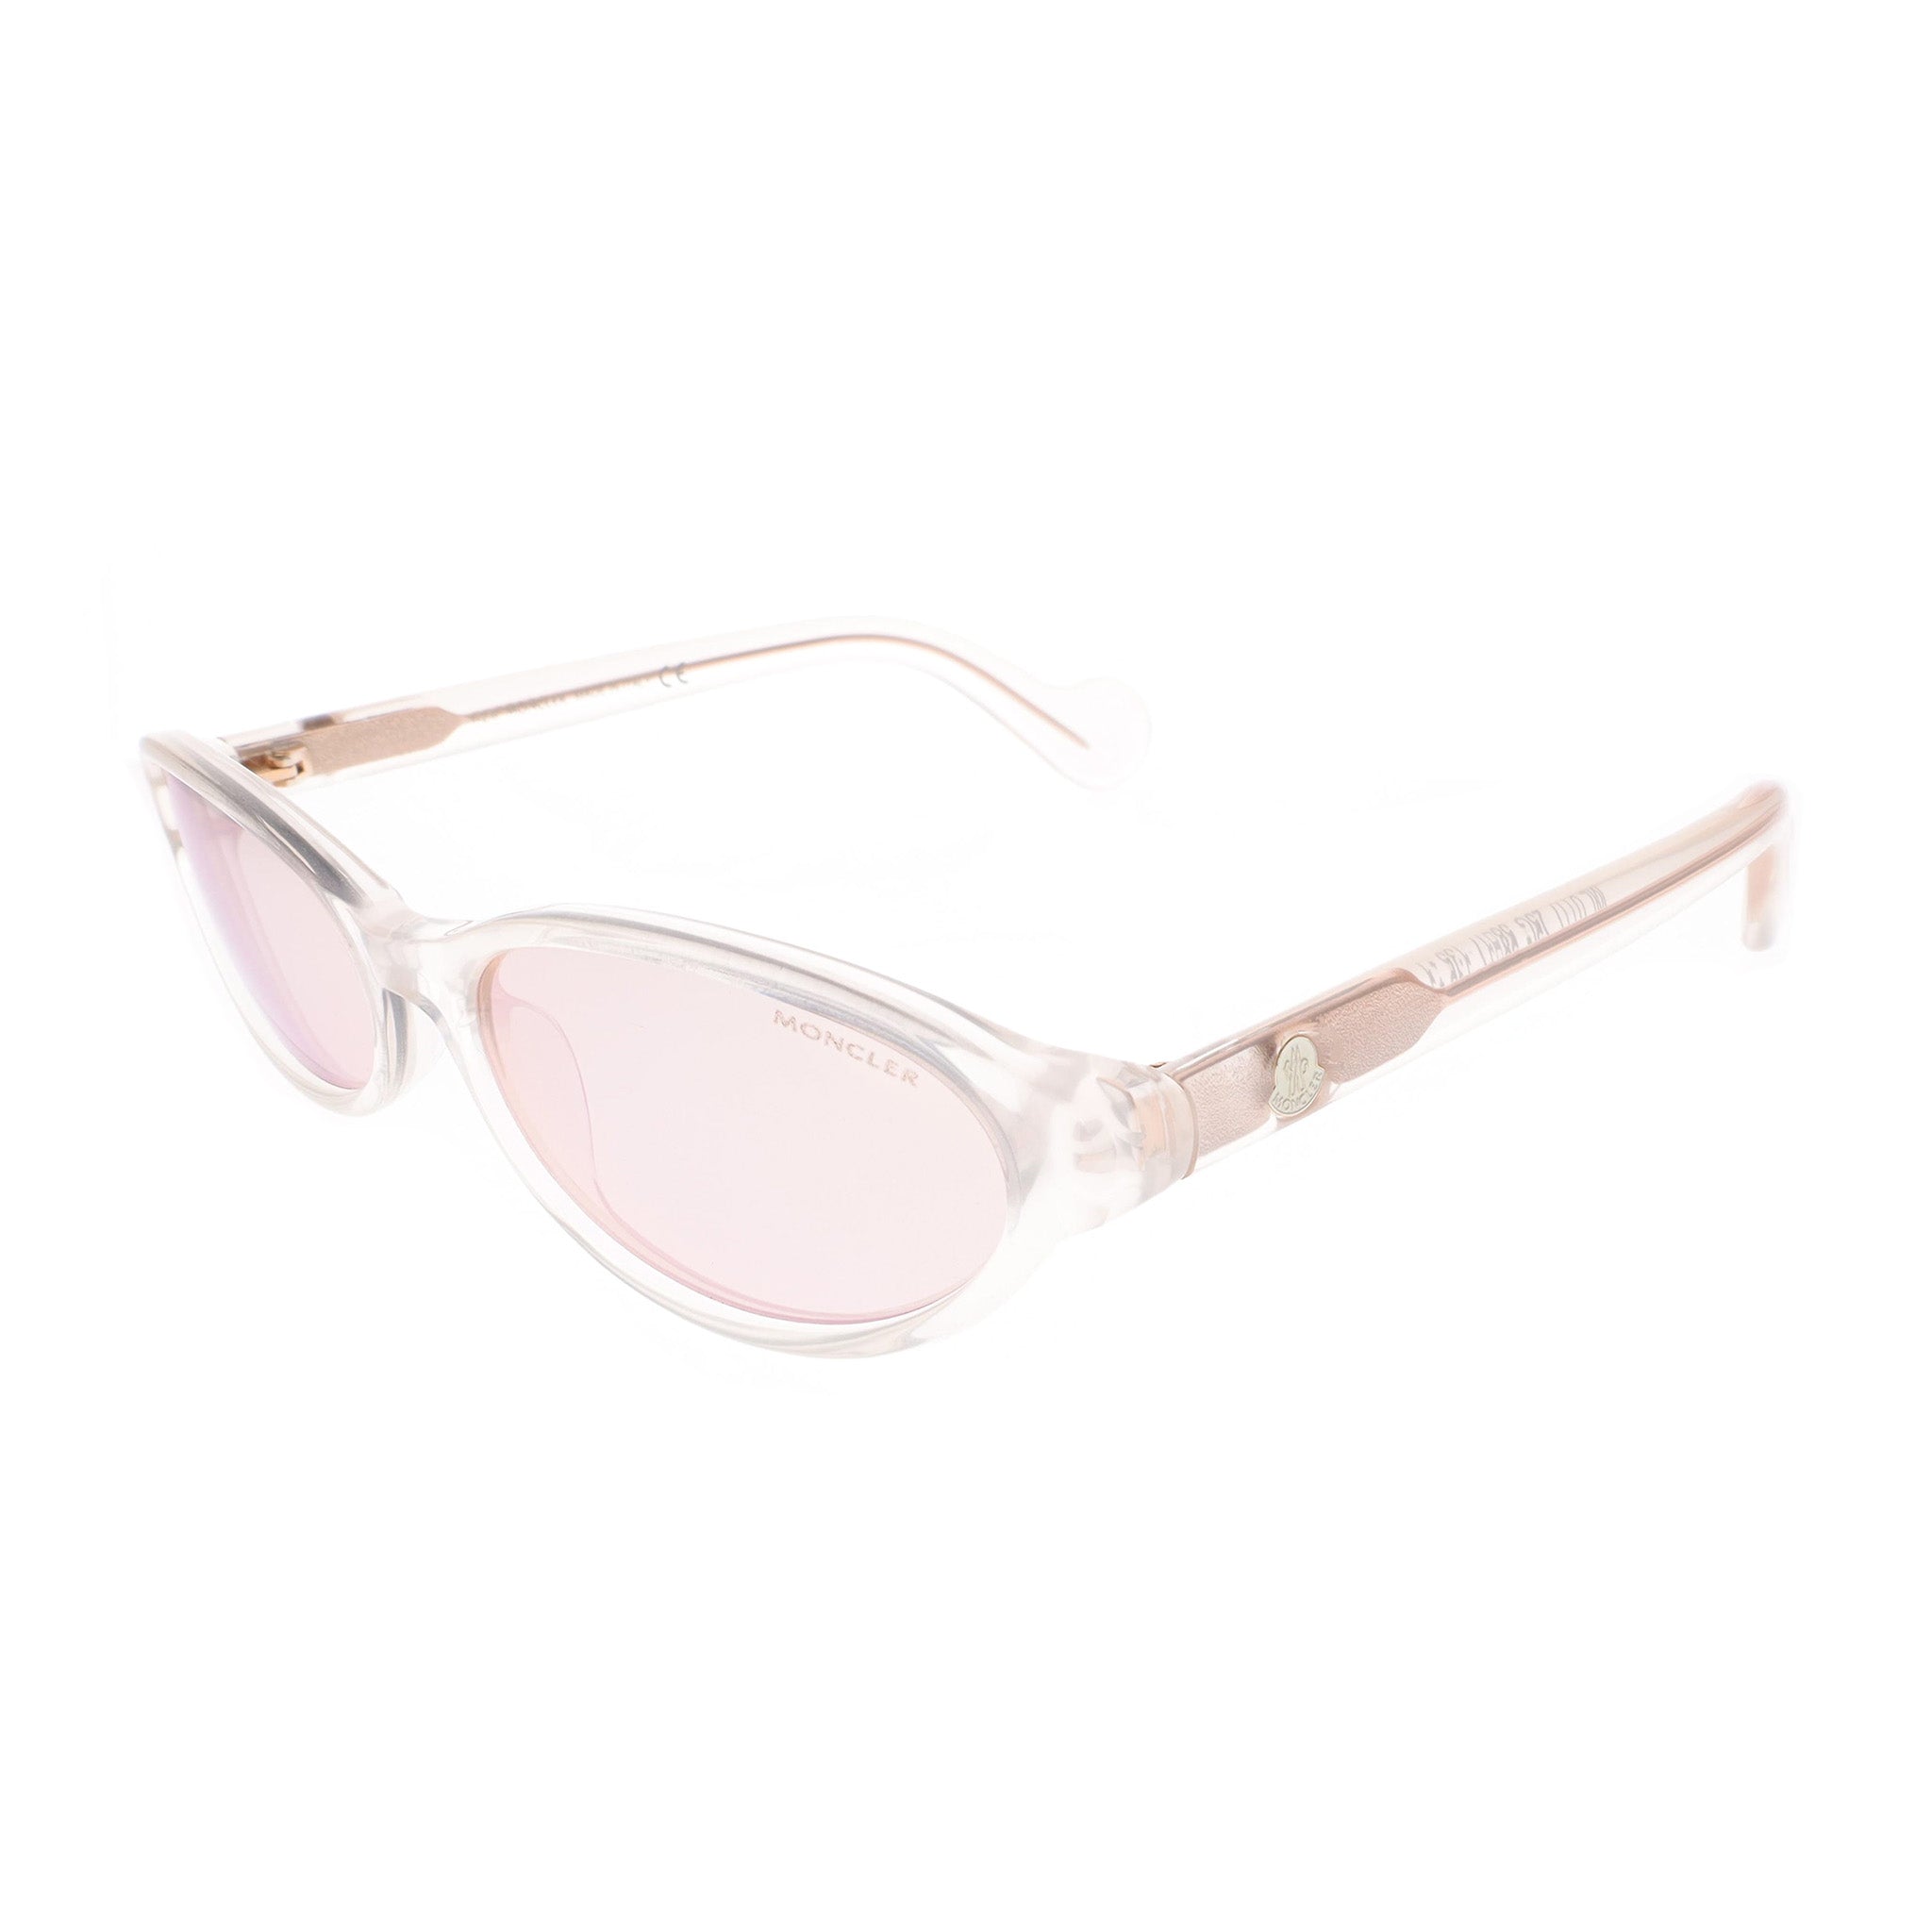 Moncler Sunglasses - ML0117-25G - Ivory / Clear